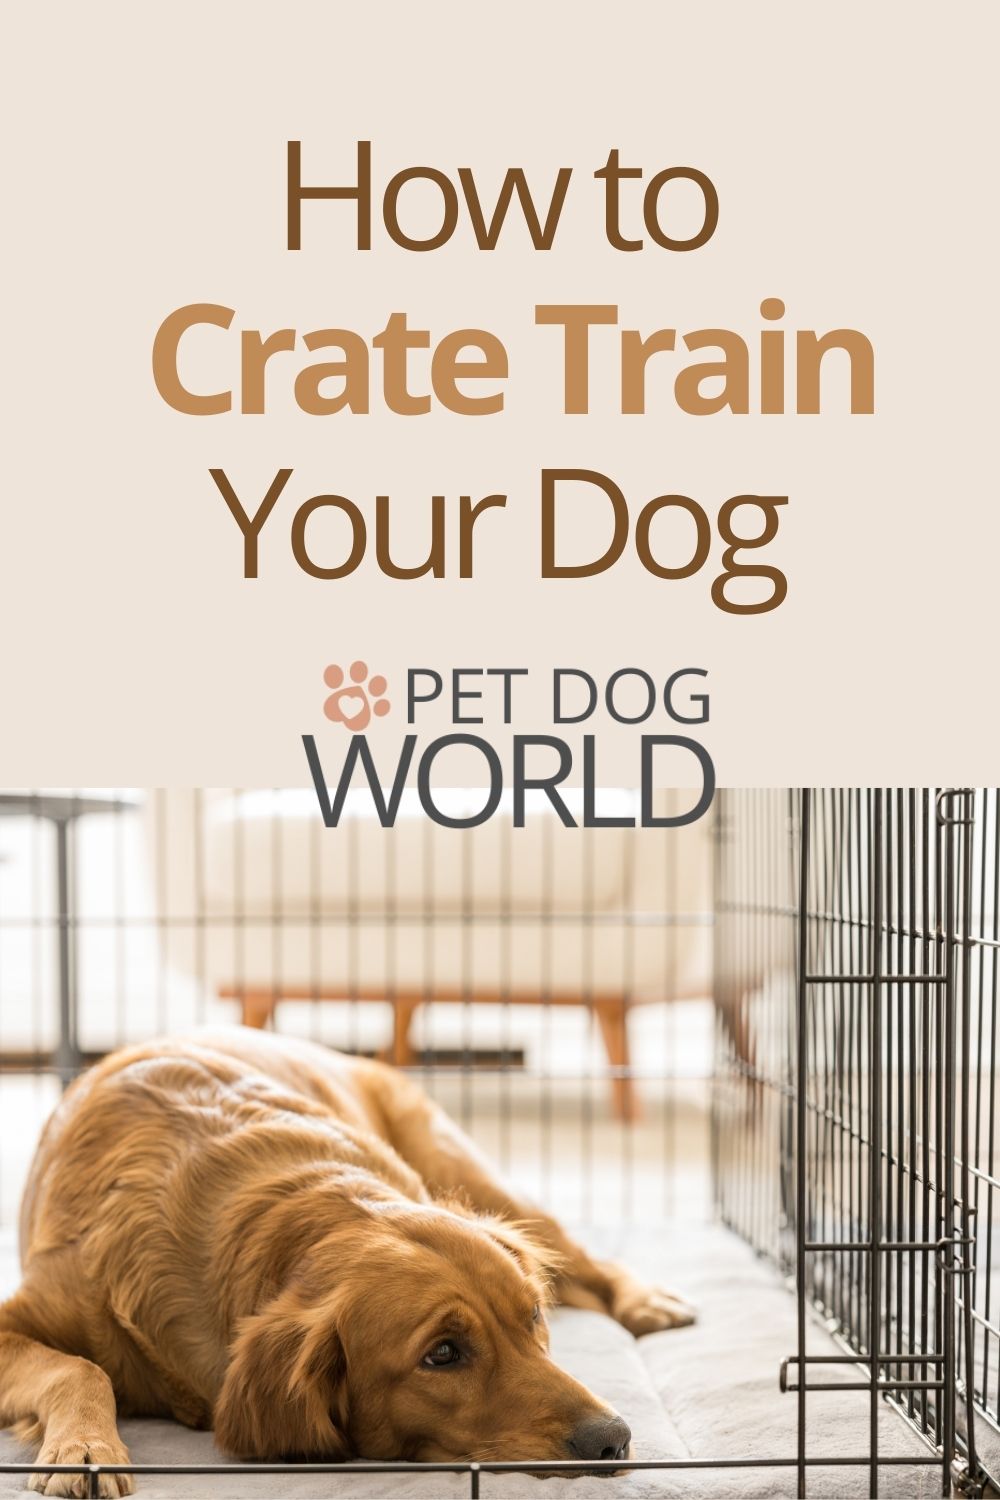 The best method for crate training your dog is through persistence and patience. Dog's will catch on very quickly by following these tips.